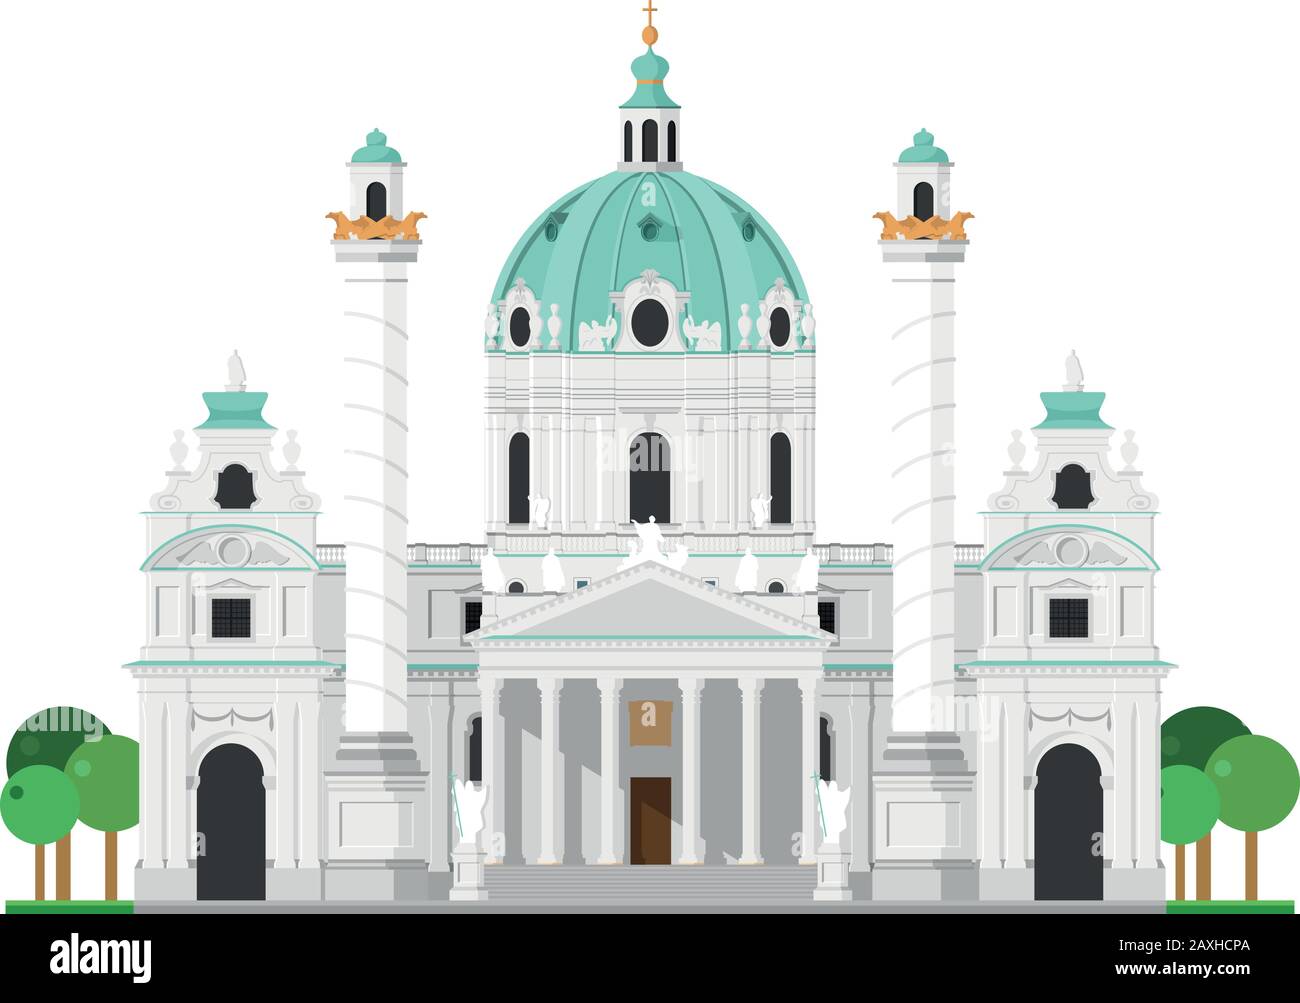 St. Charles’ Church (Vienna, Austria). Isolated on white background vector illustration. Stock Vector